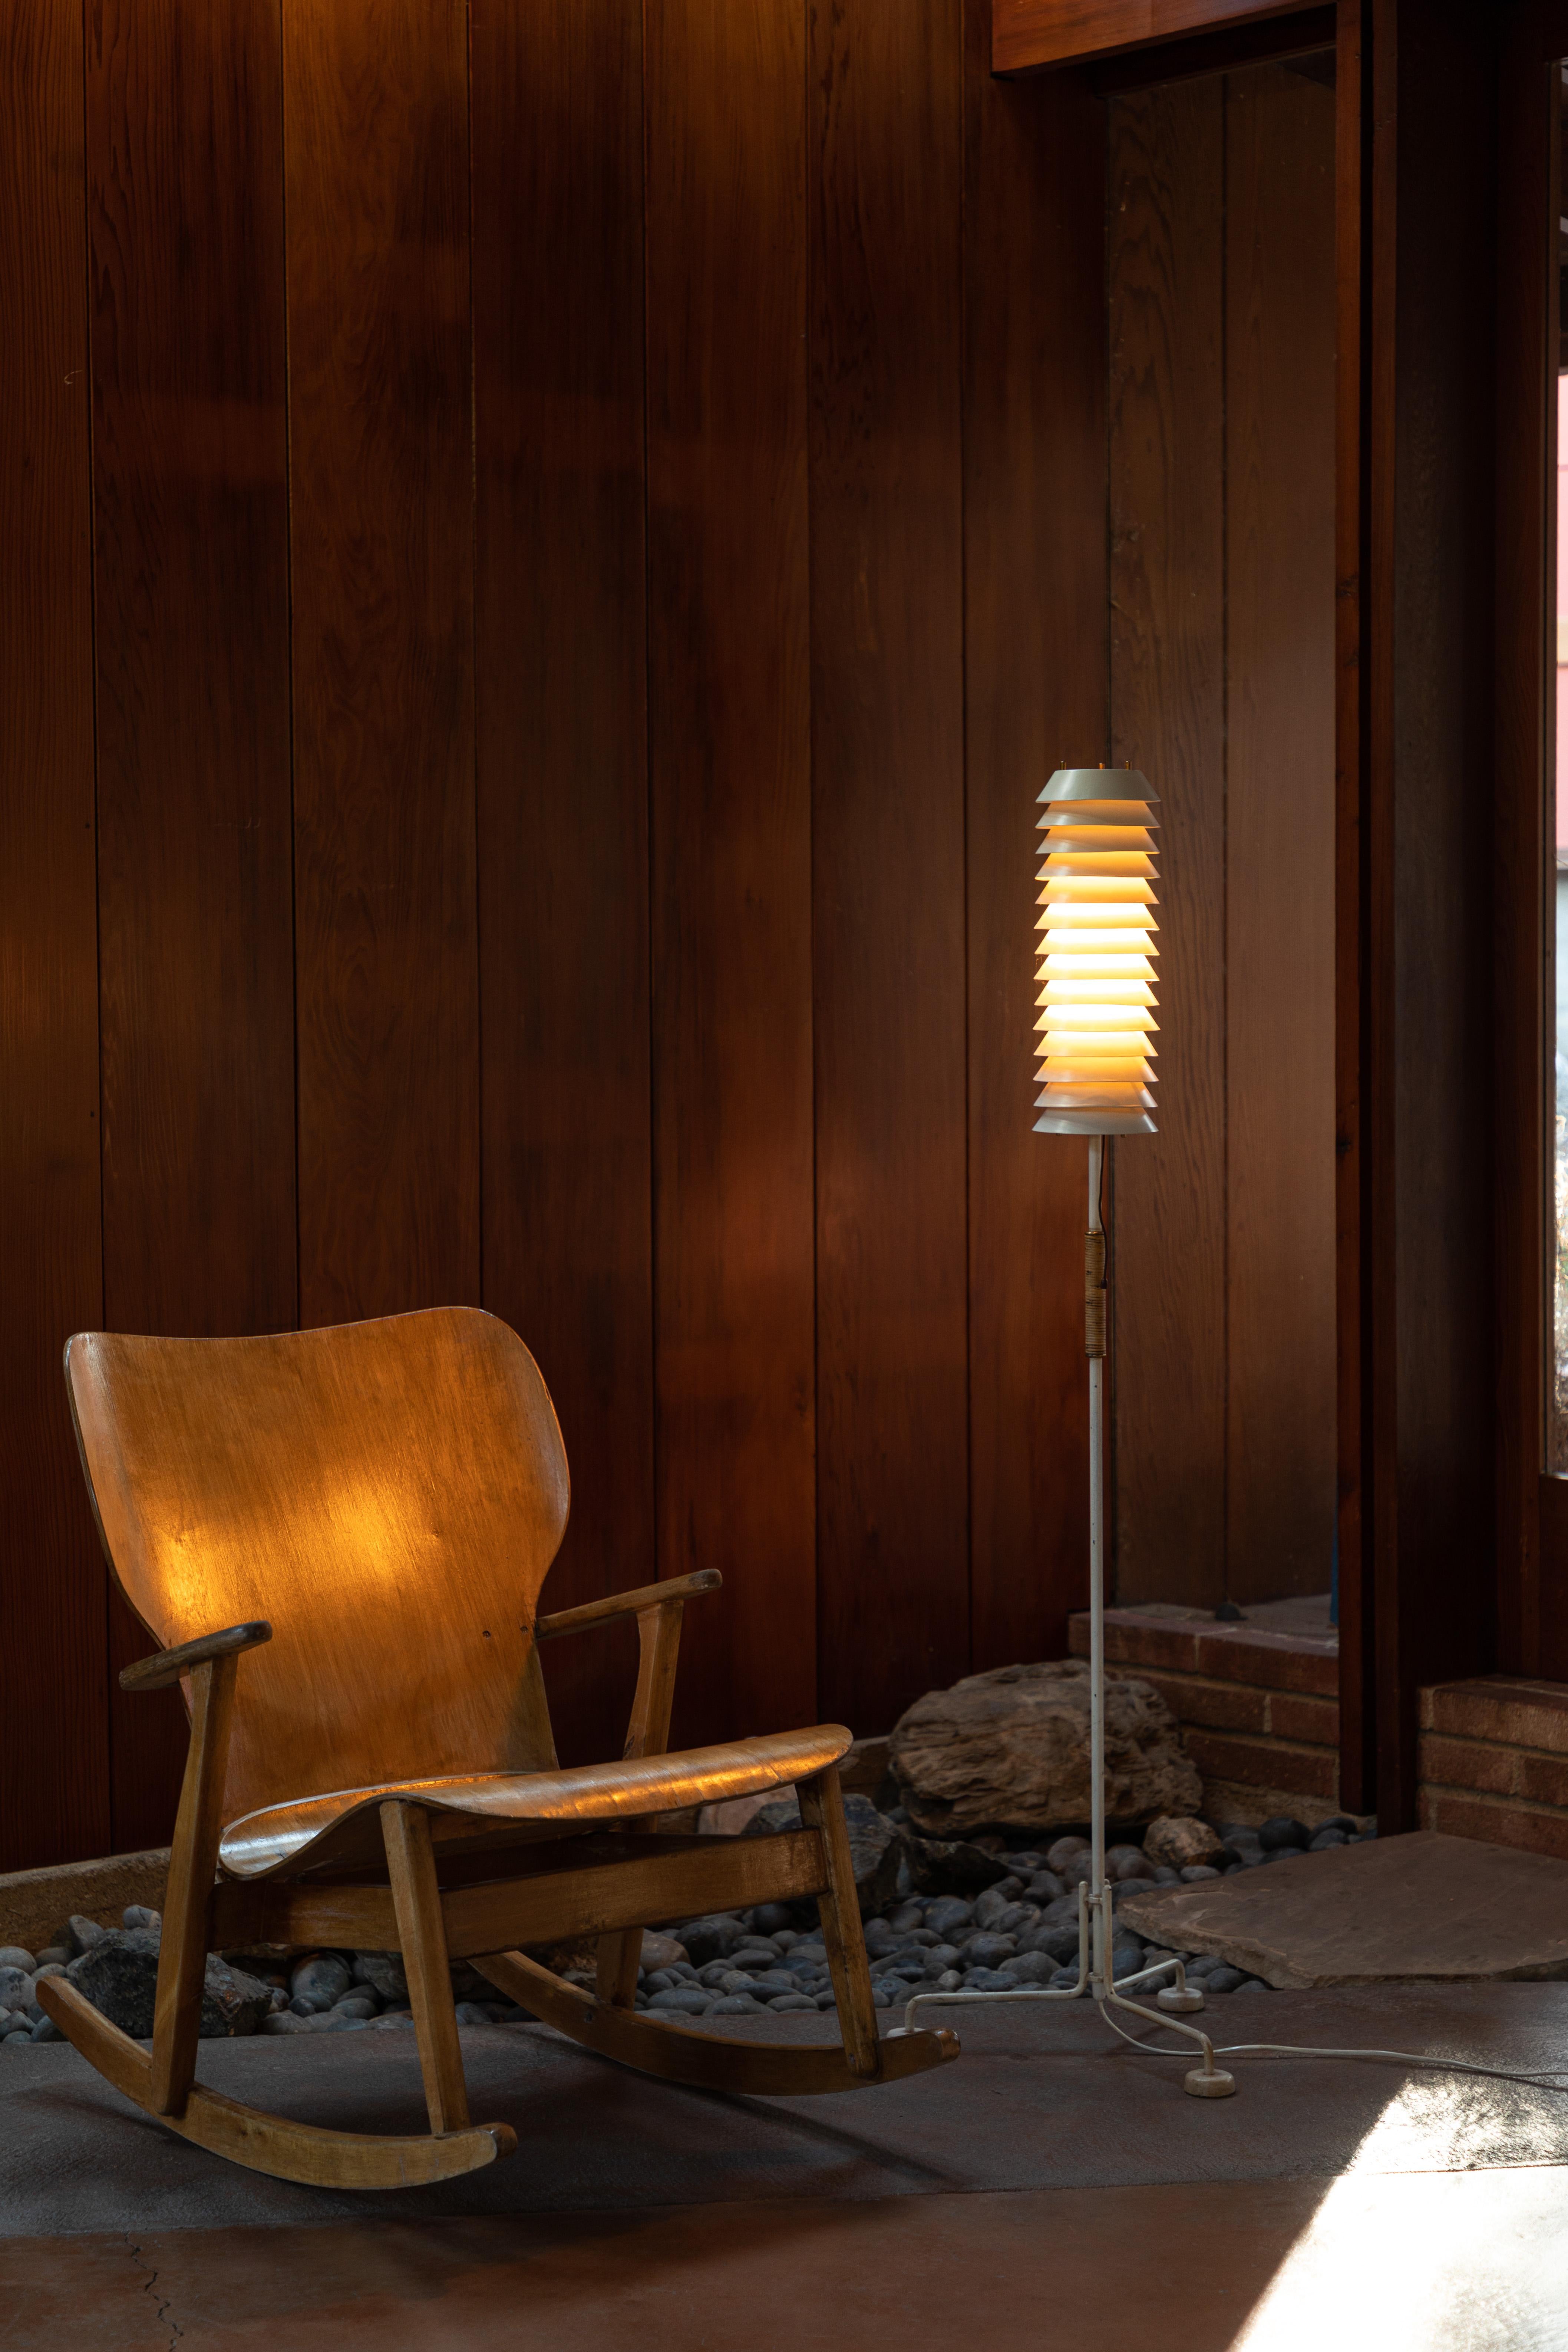 1955, Ilmari Tapiovaara 'Maija' floor lamp for Asko/Hienoterä. A rare original vintage edition made in Finland and executed in painted metal with brass hardware and rattan. This highly refined and sculptural lamp casts beautifully diffused slices of